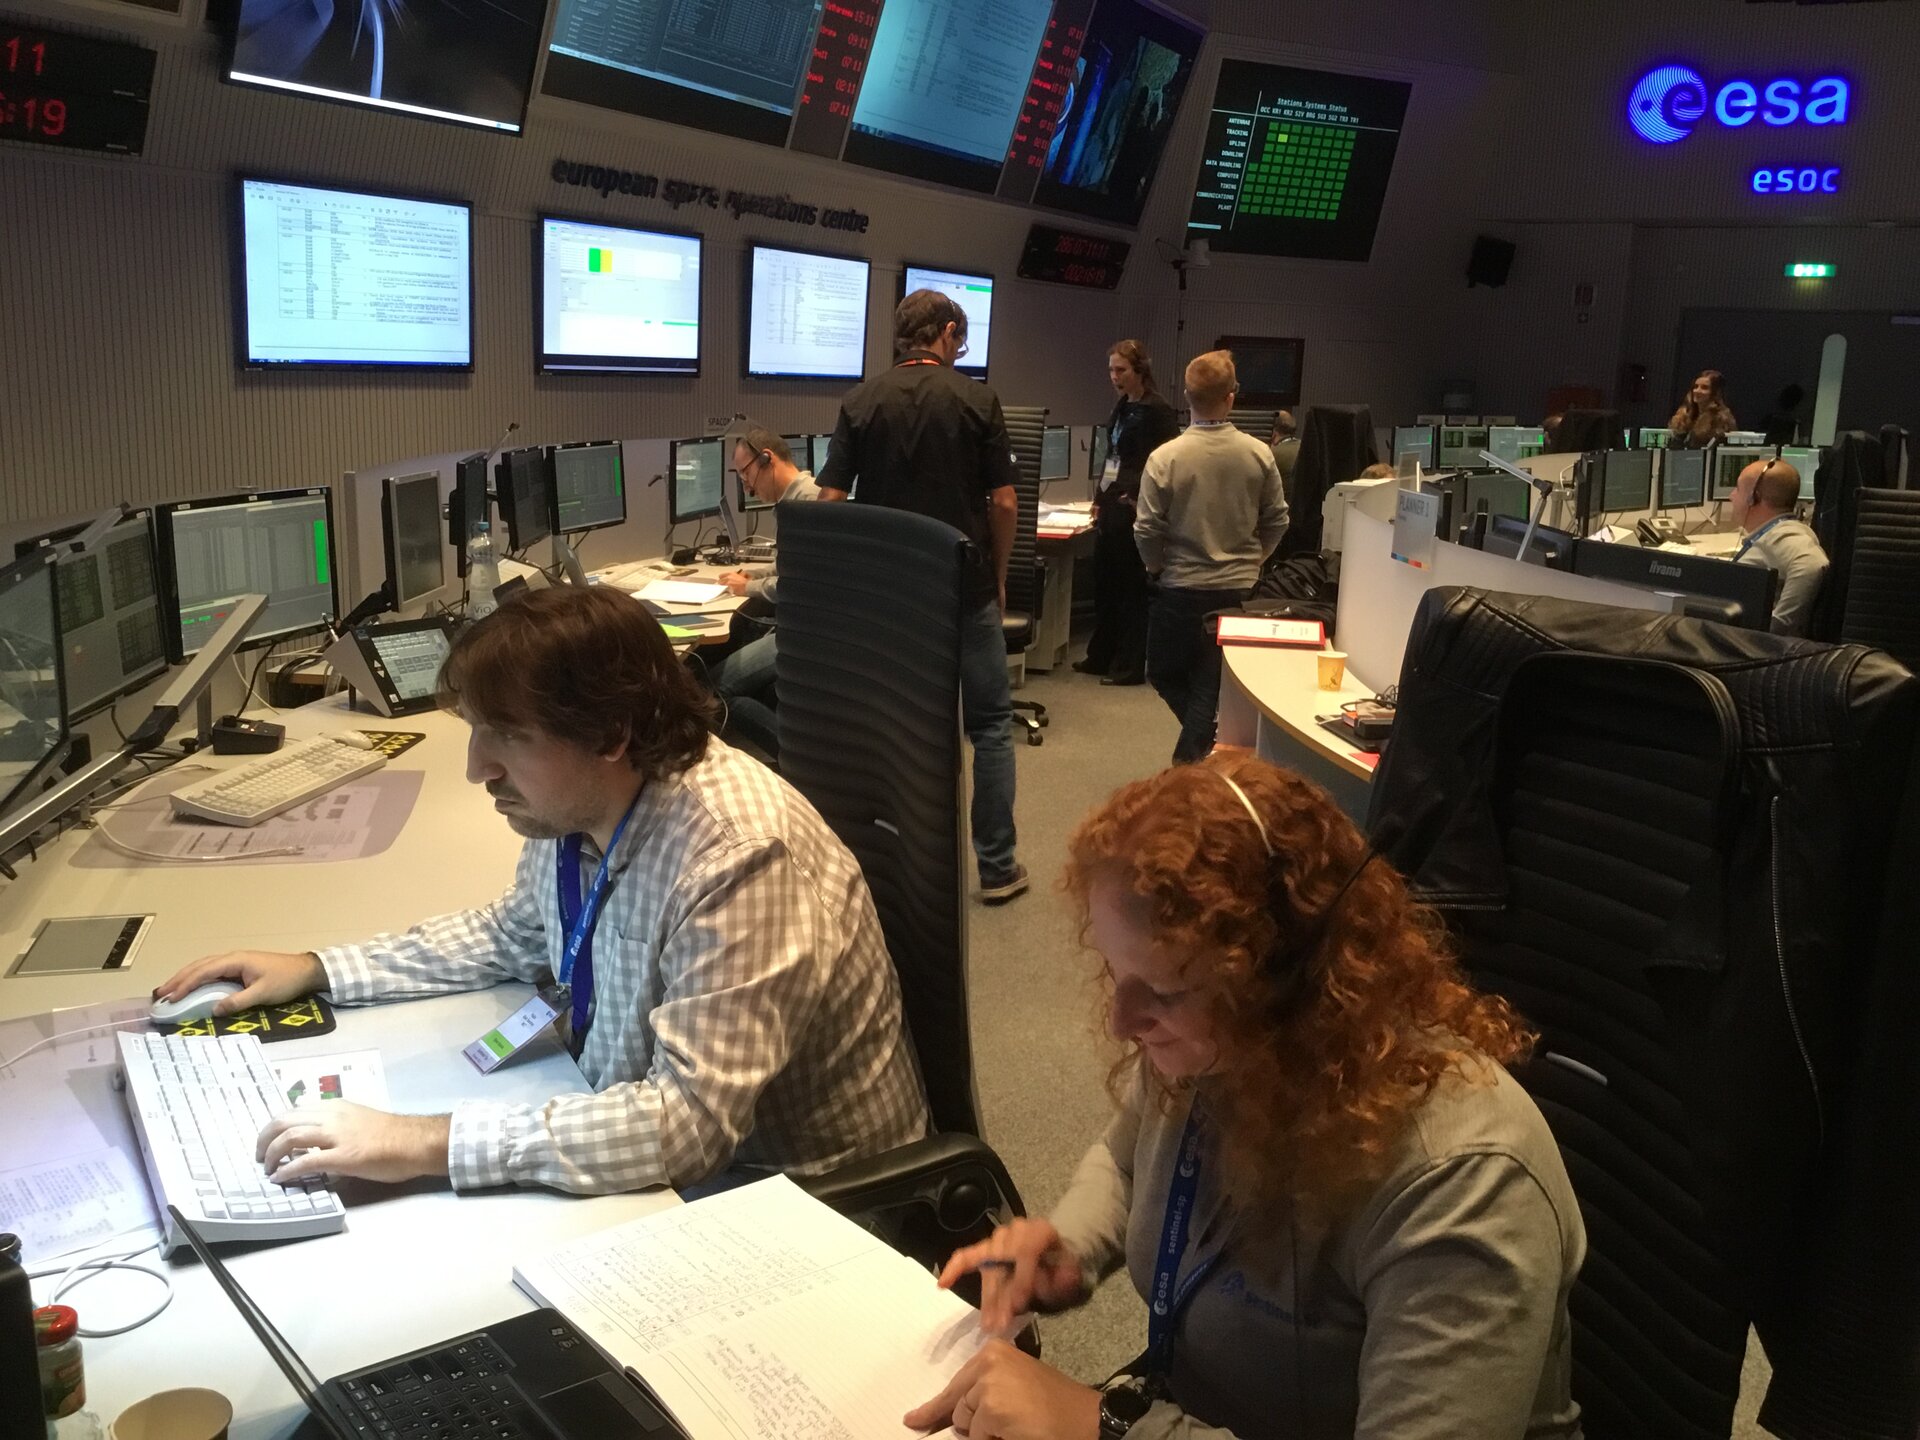 Launch day at mission control